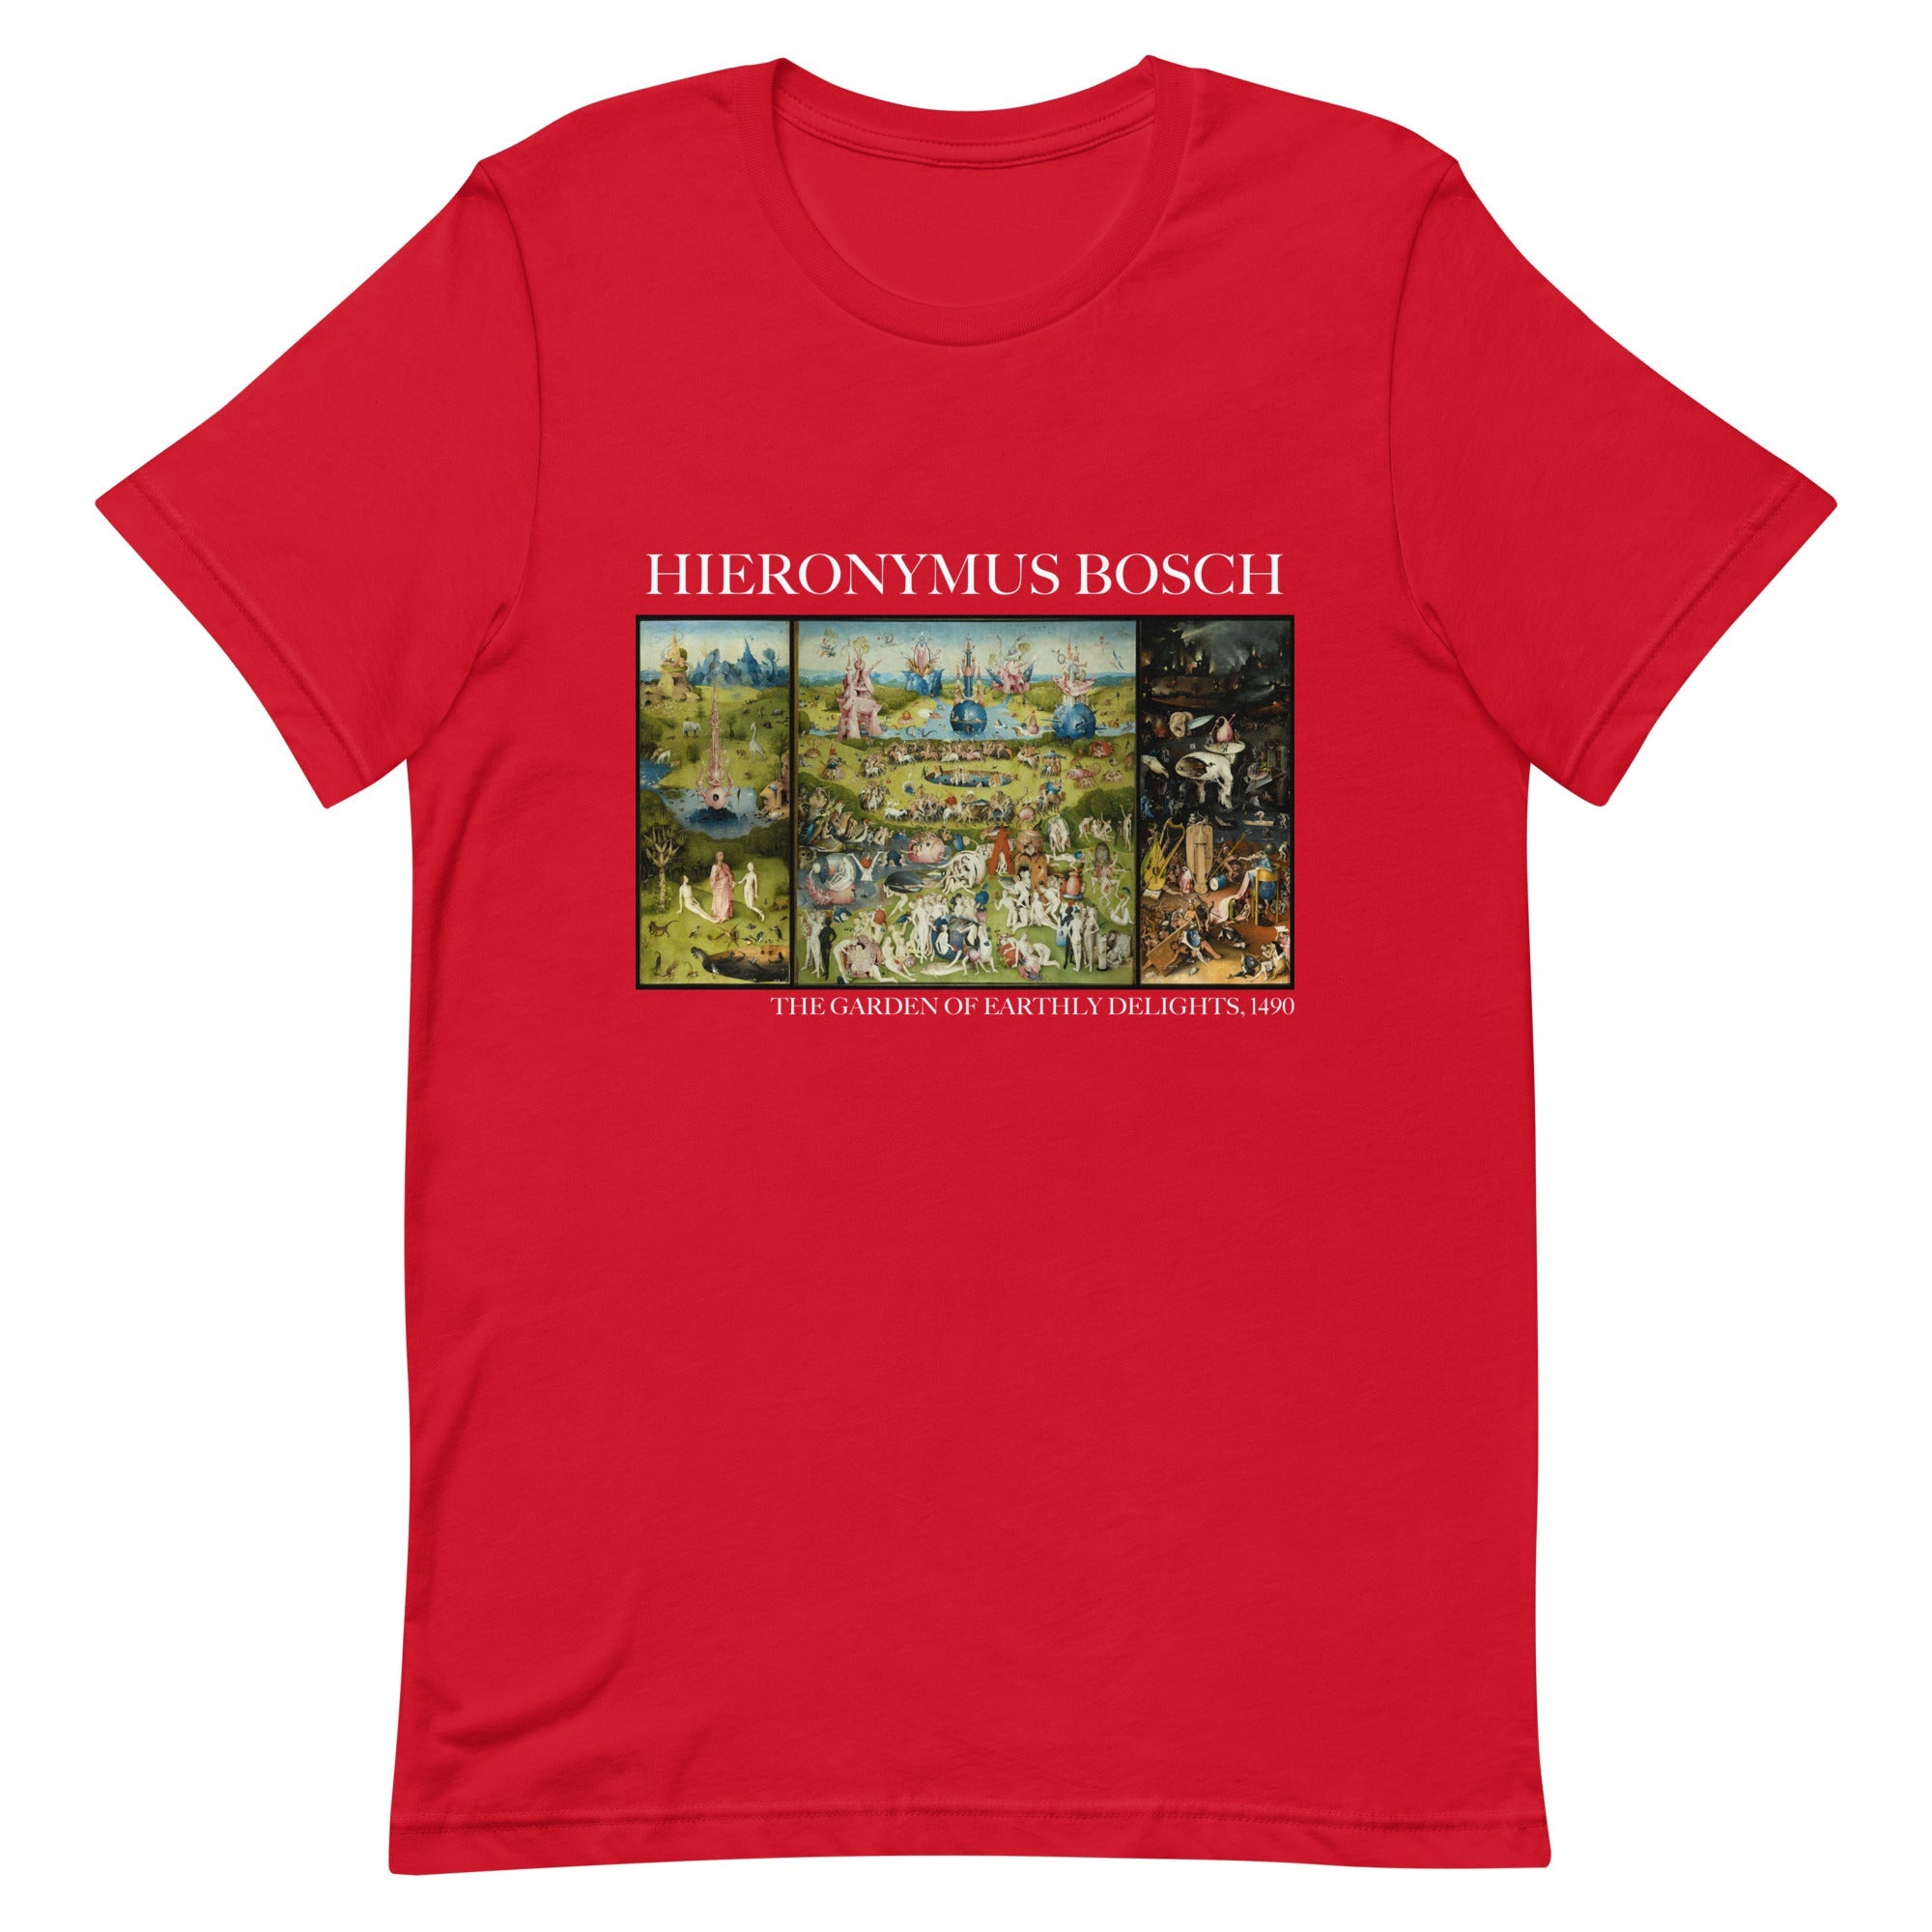 Hieronymus Bosch 'The Garden of Earthly Delights' Famous Painting T-Shirt | Unisex Classic Art Tee